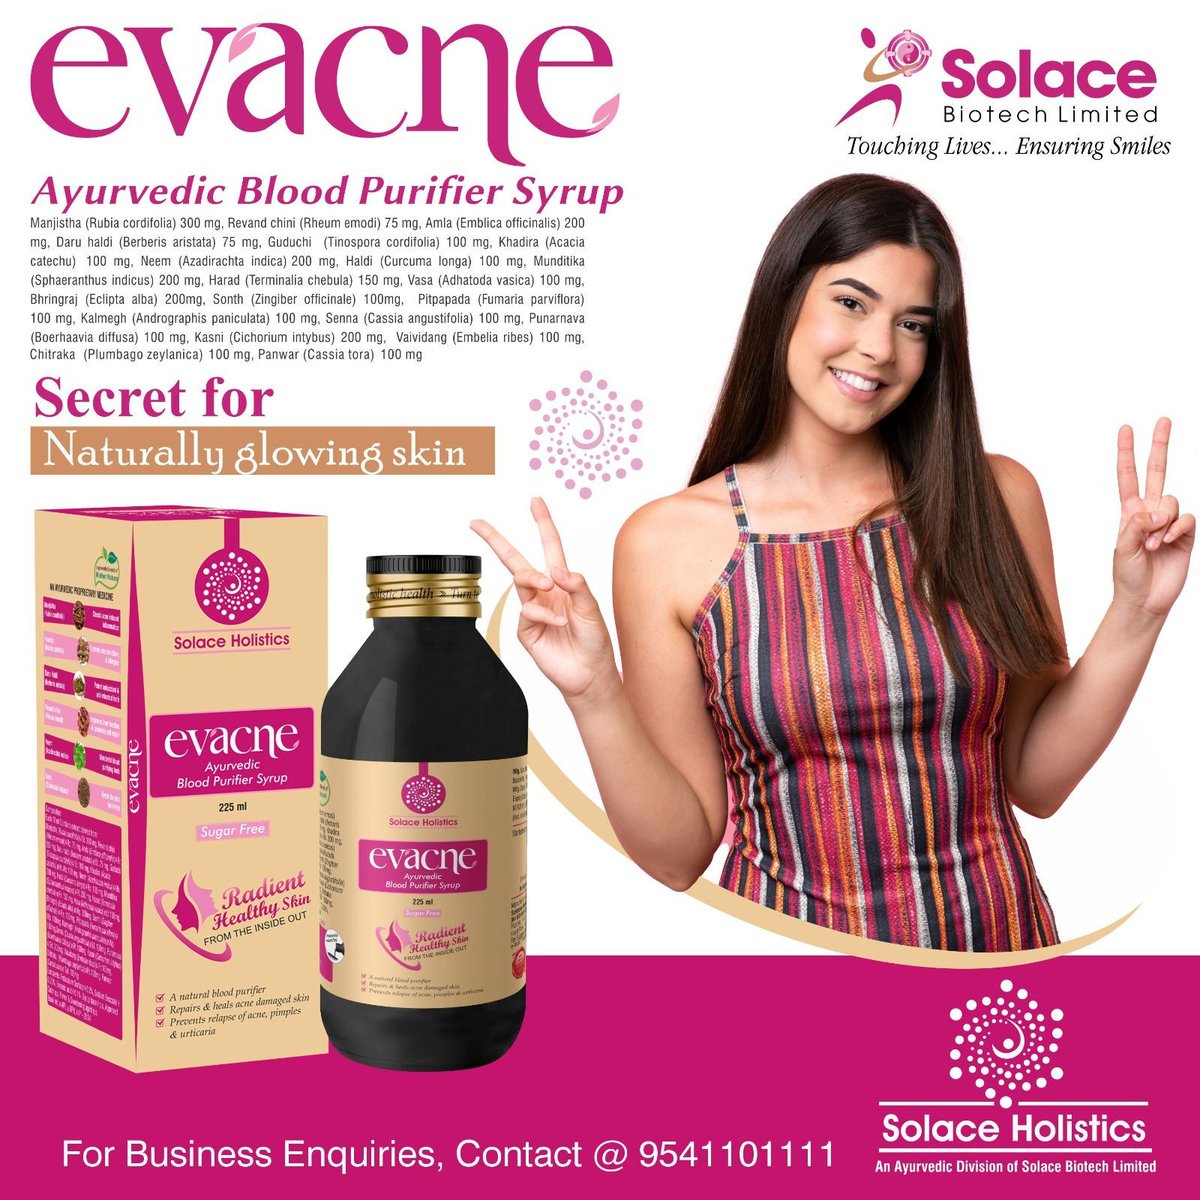 Evacne Syrup is an Ayurvedic blood purifier that cleanses the blood and promotes clear, healthy skin. Made with natural herbs, it detoxifies the body, reducing acne and blemishes, and supports liver function. 
#herbaldetox #clearskinnaturally #naturalskincare #ayurvedicmedicine